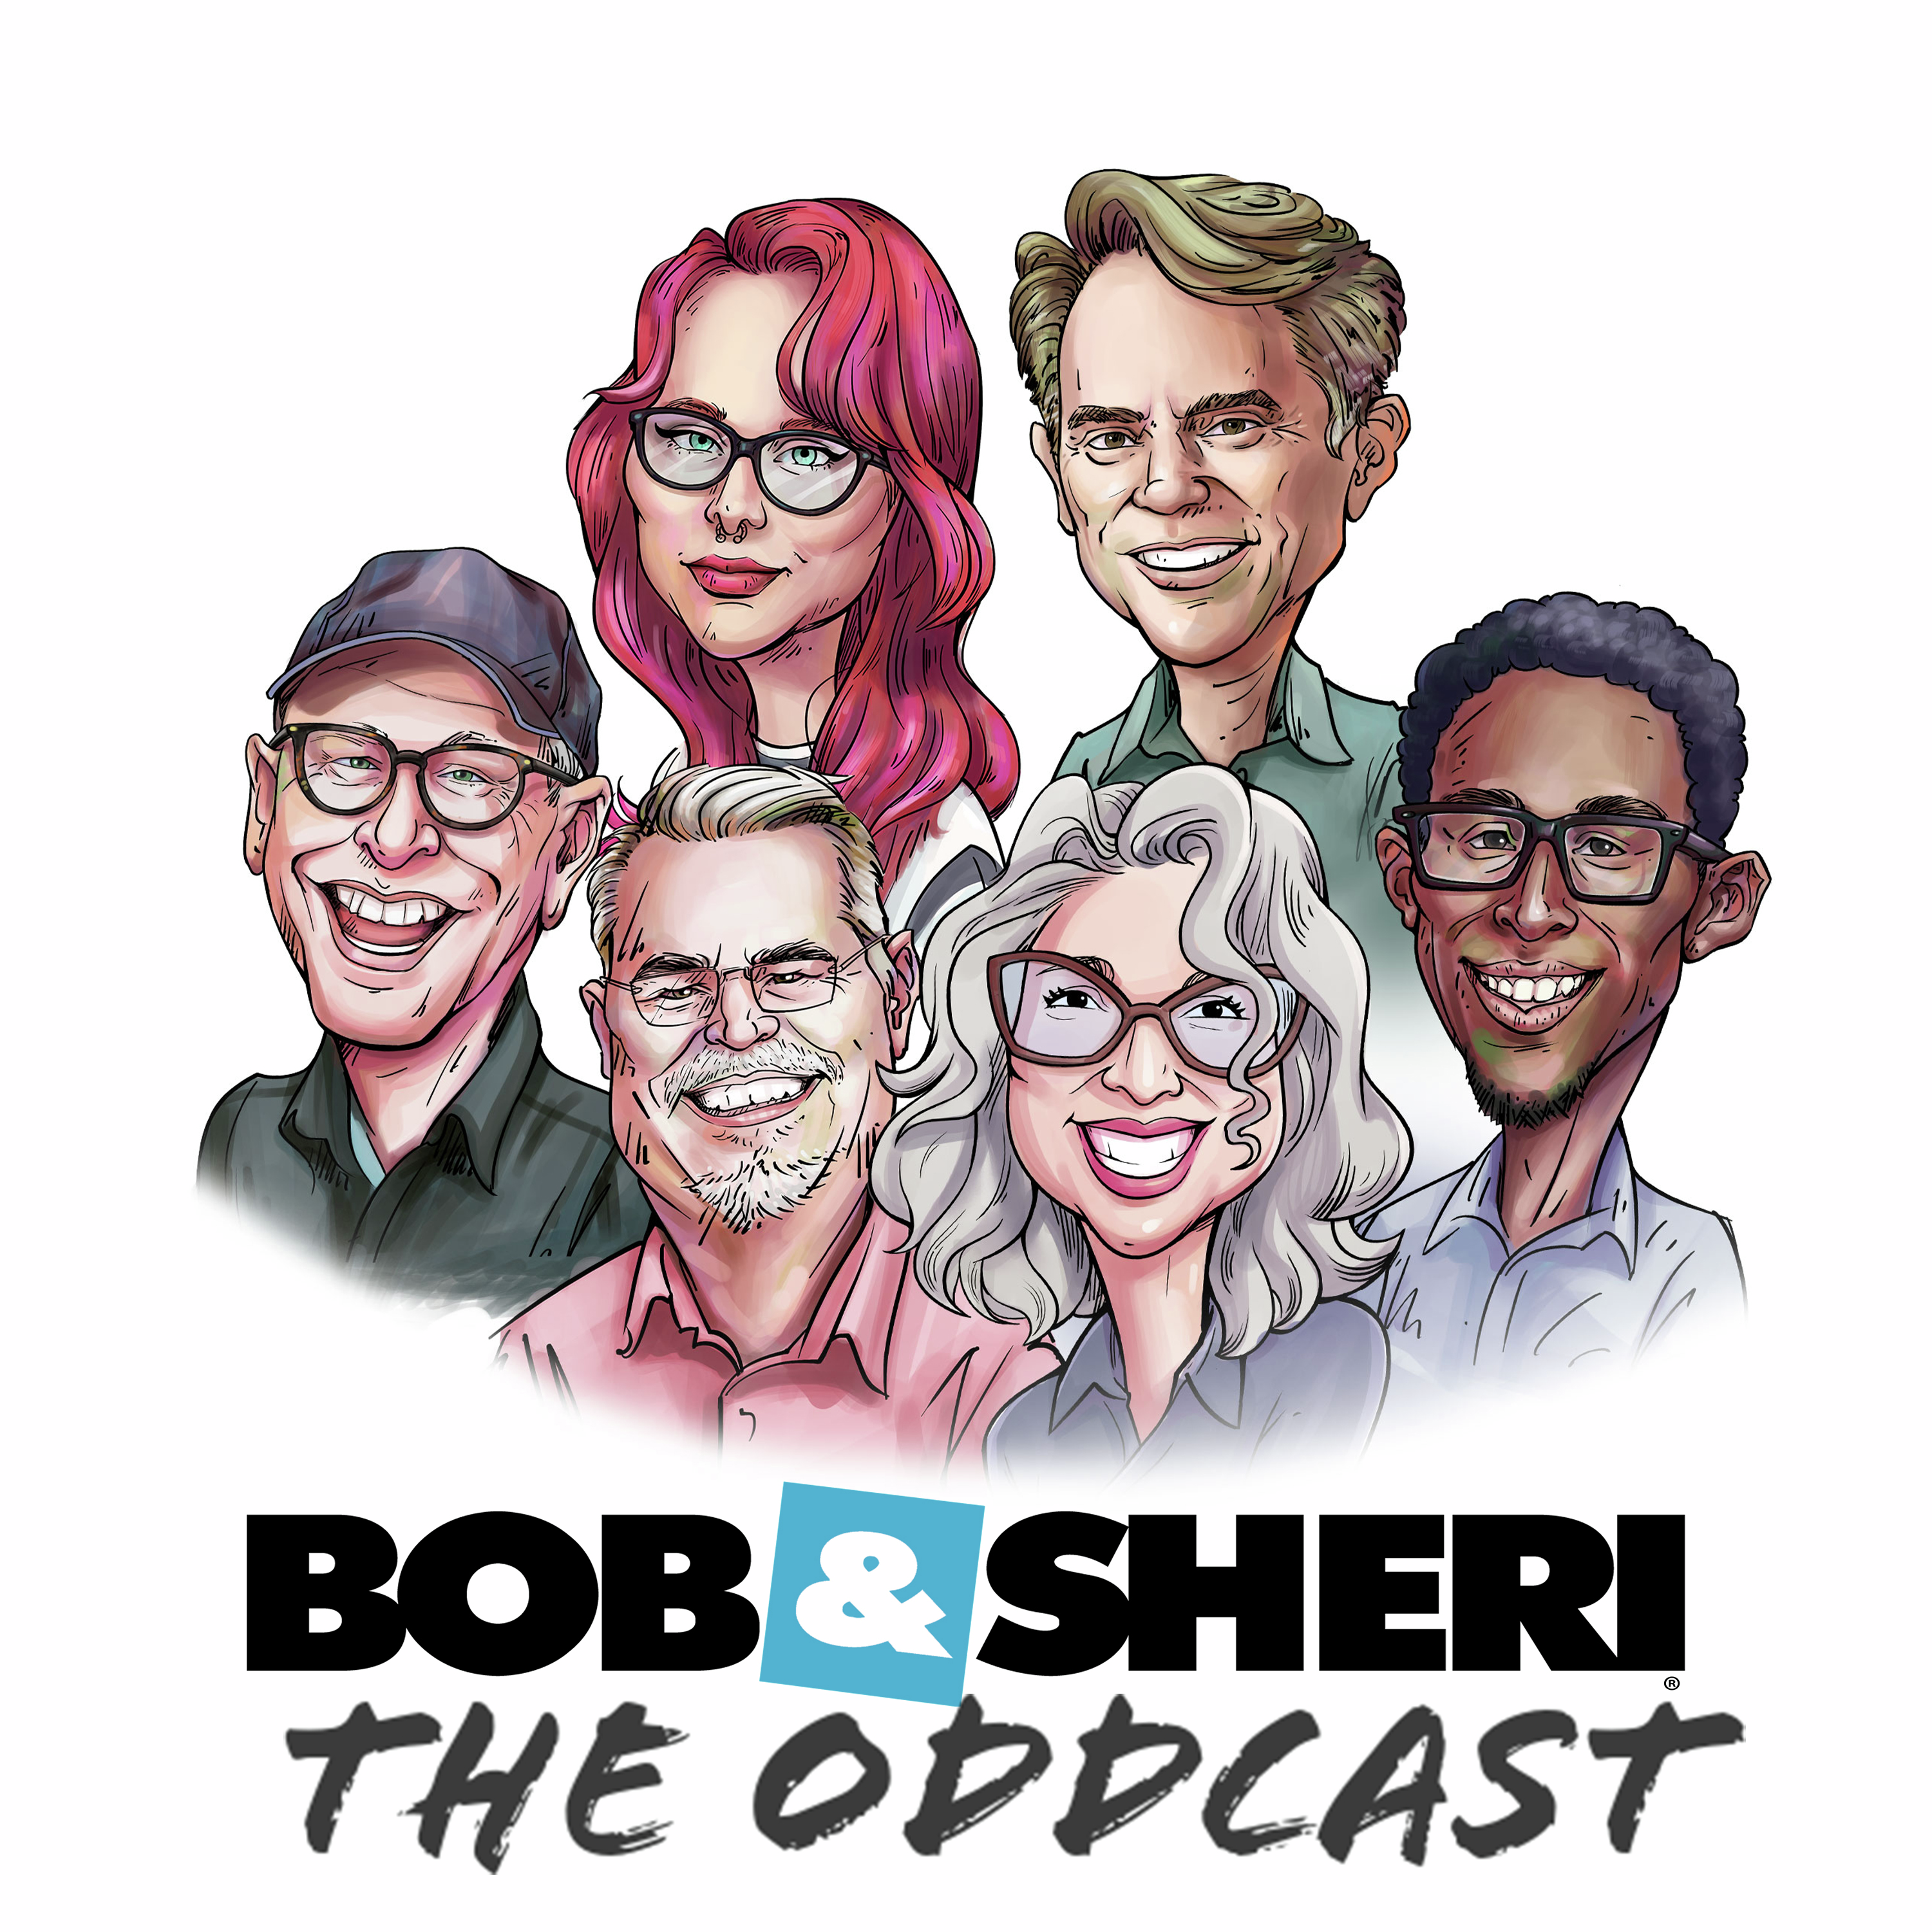 The Oddcast Podcast